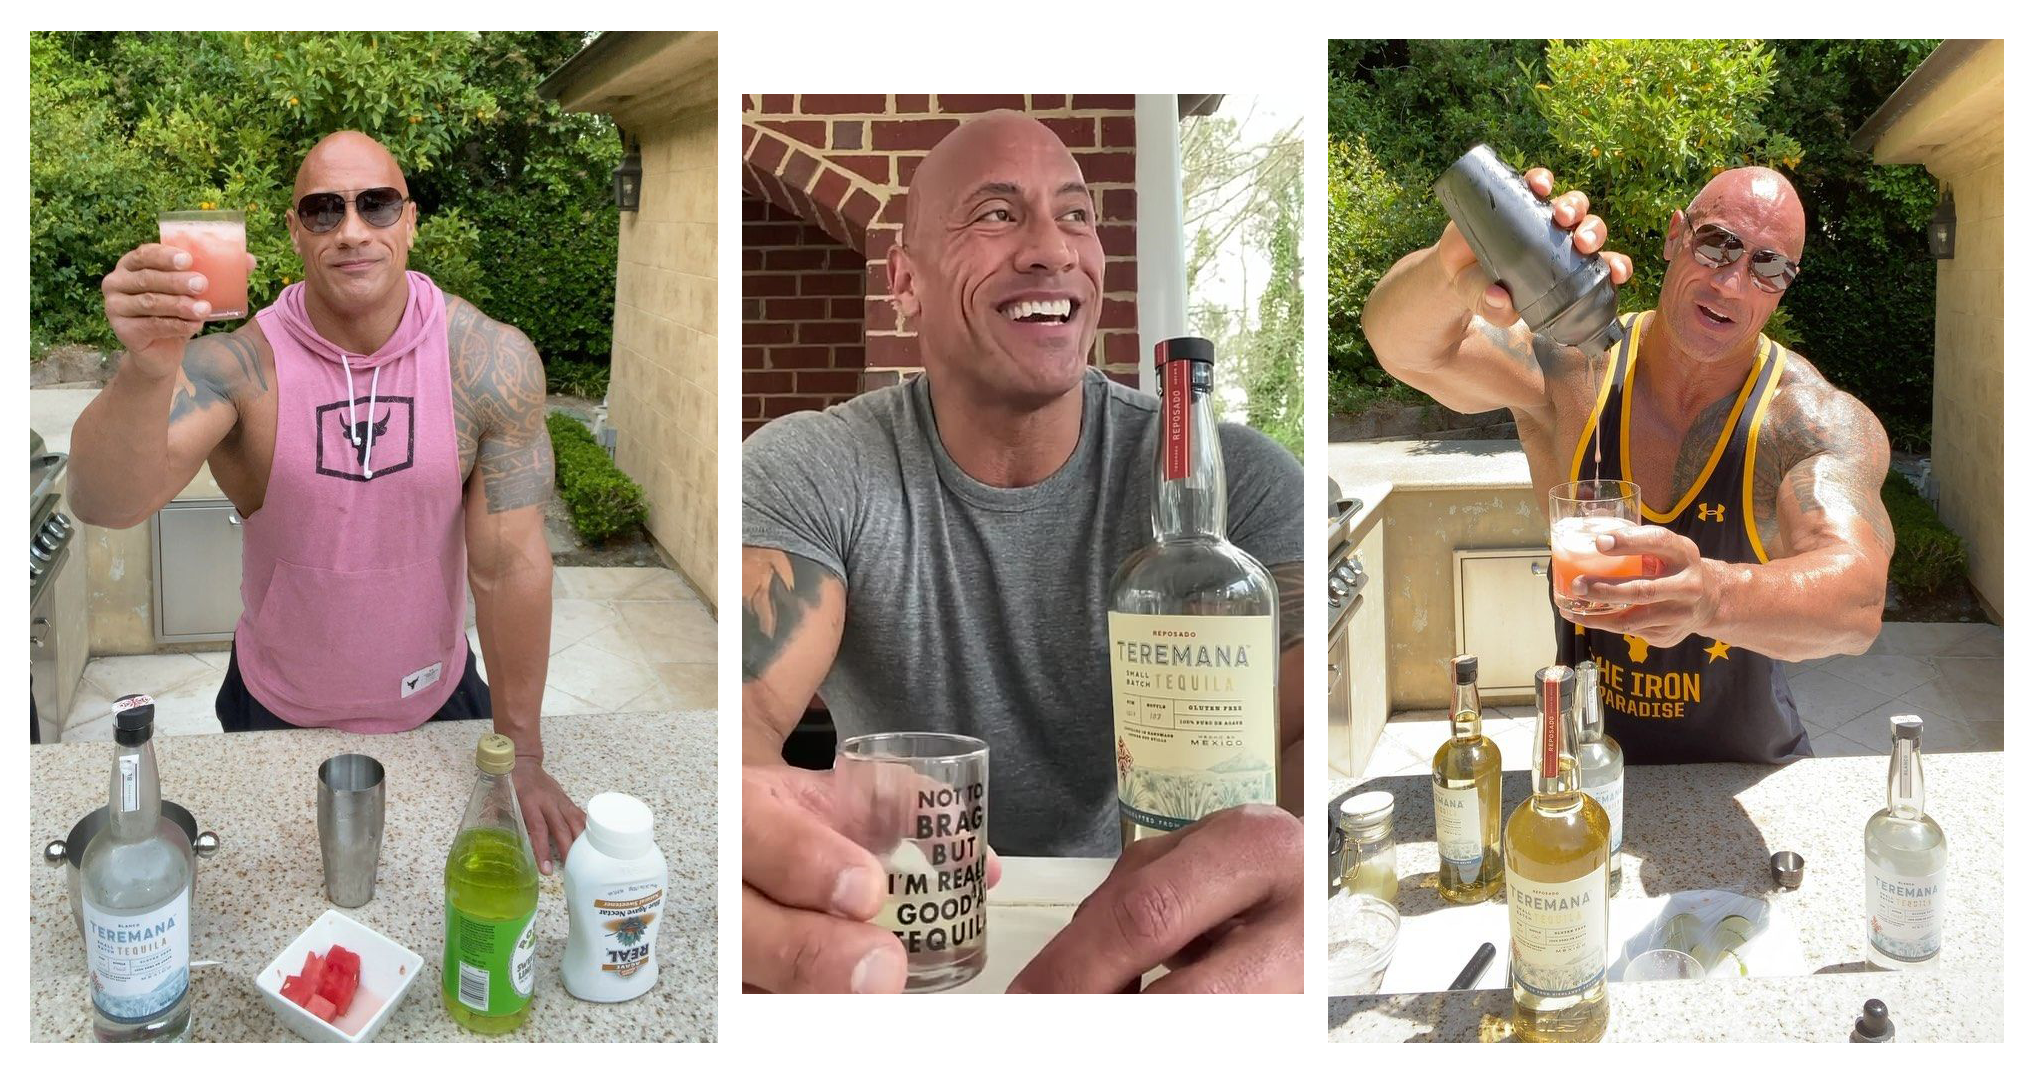 the rock shares tequila recipes made with teremana tequila on Instagram.